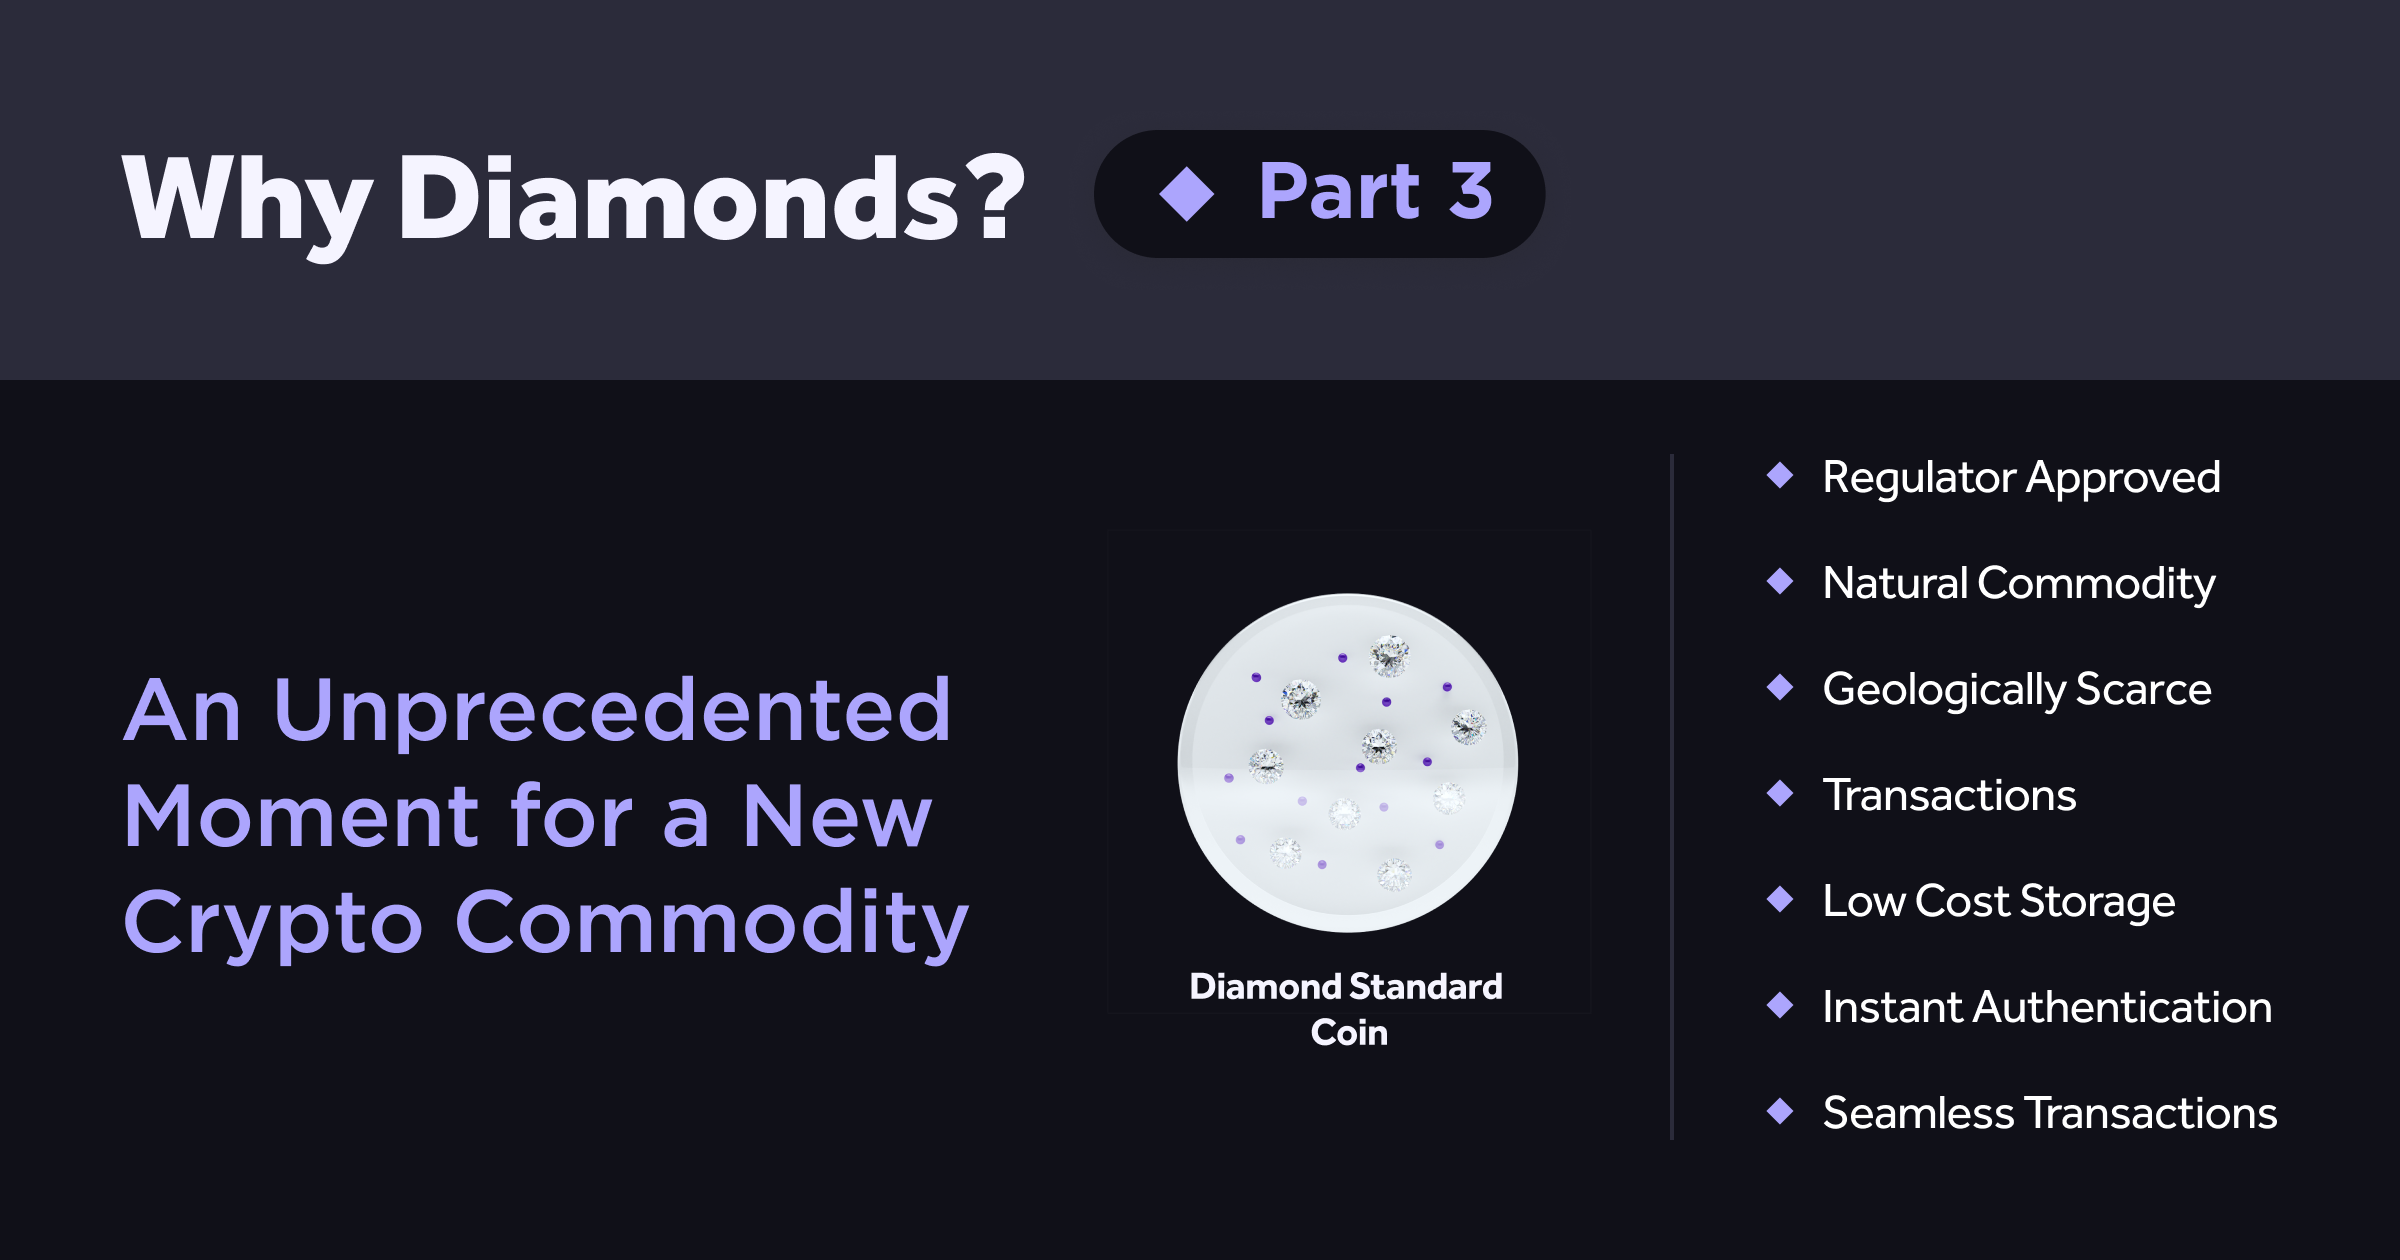 Why Diamonds? Part 3: An Unprecedented Moment for a New Crypto Commodity